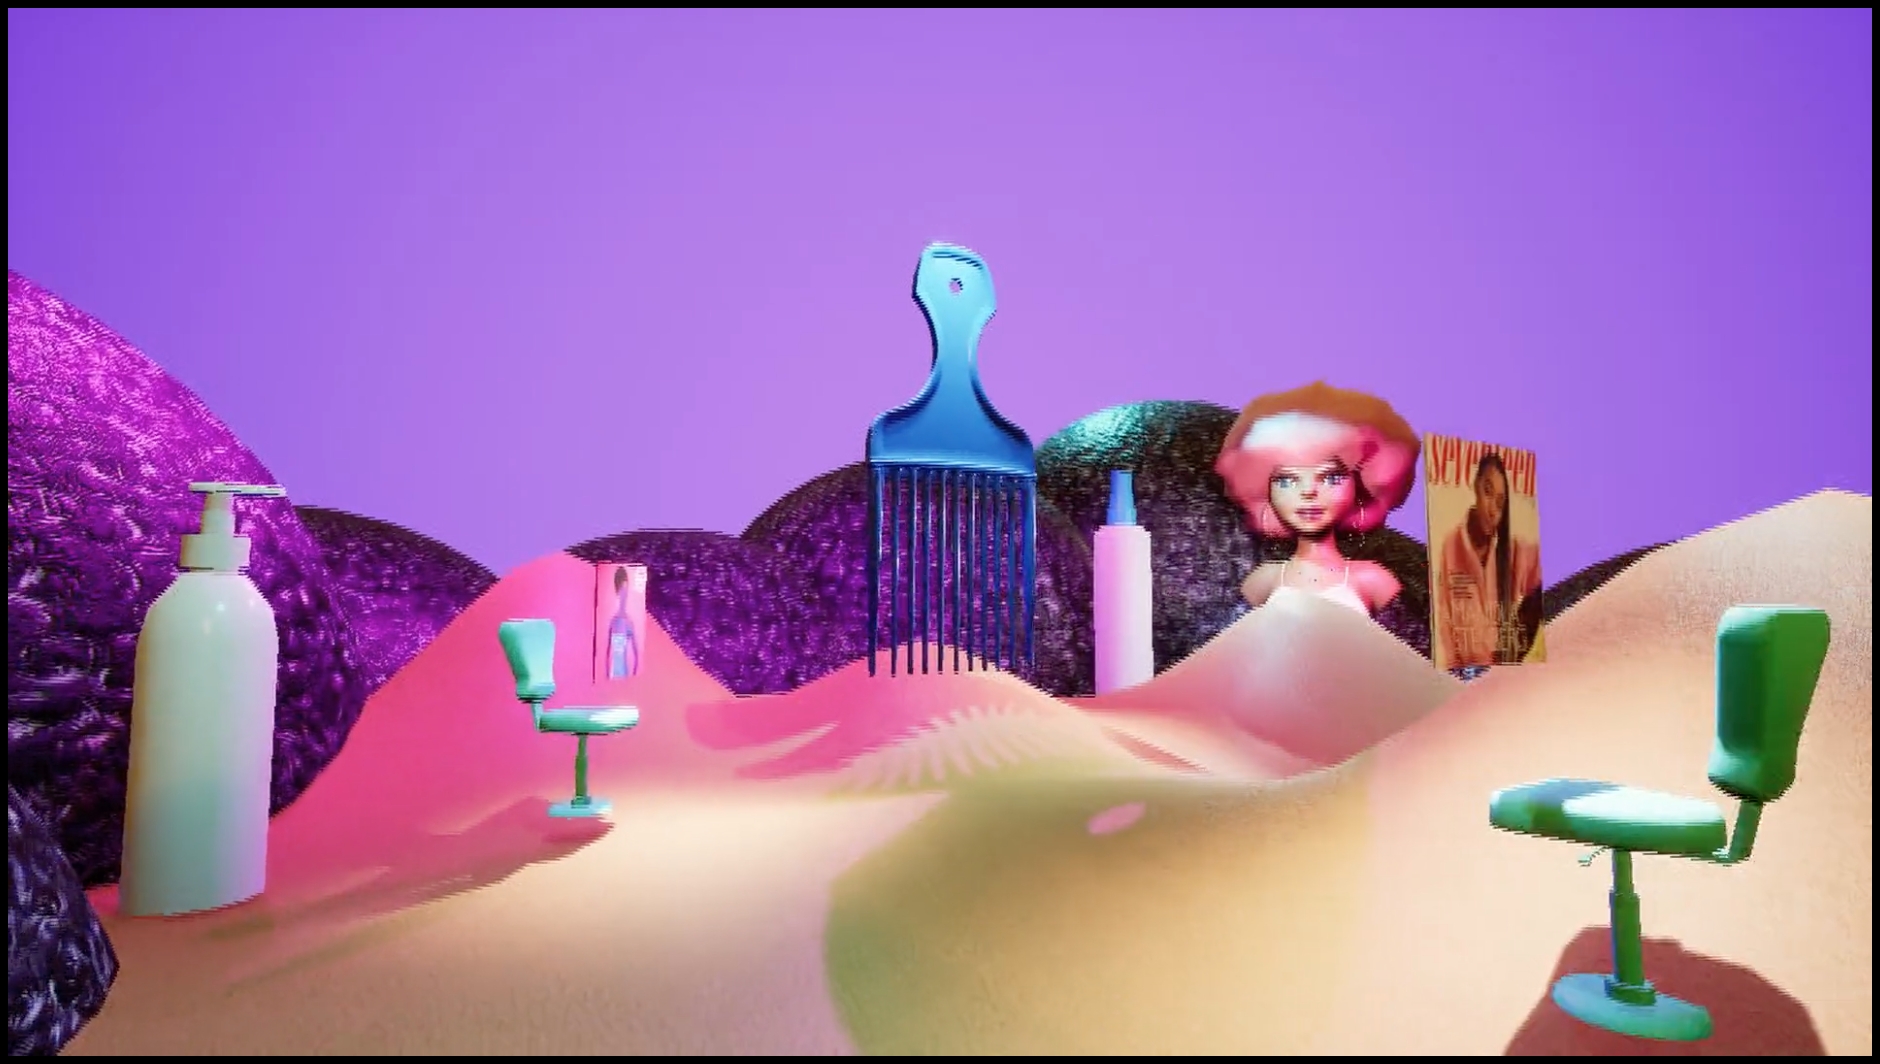 A 3D virtual landscape that depicts salon chairs, a giant hair pick, bottles of lotion, a girl with an afro hairstyle, and a Seventeen magazine with a Black model on the cover.